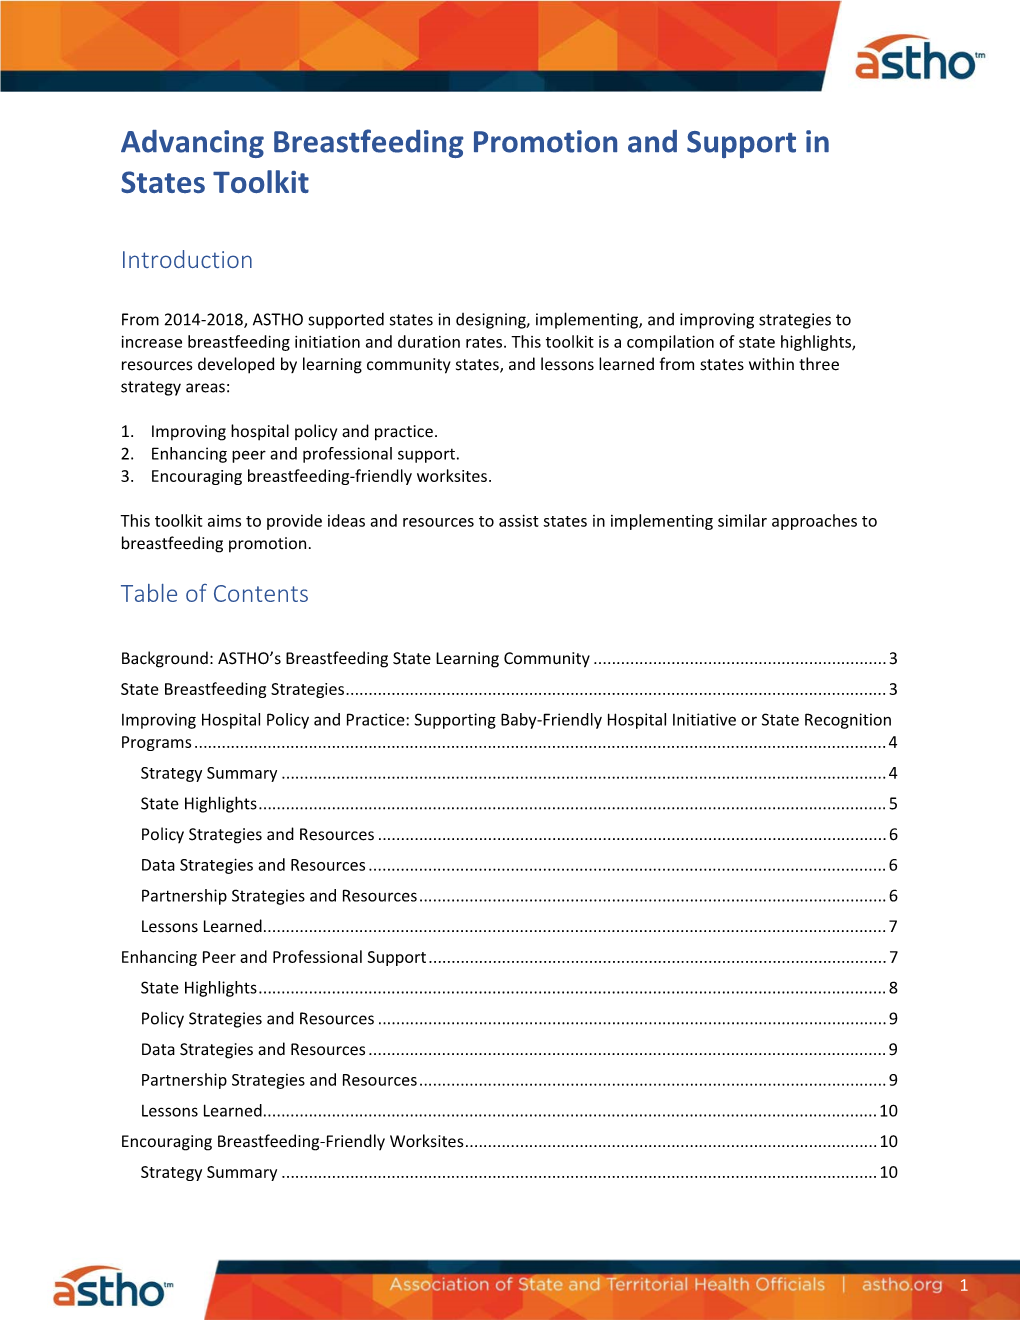 Advancing Breastfeeding Promotion and Support in States Toolkit